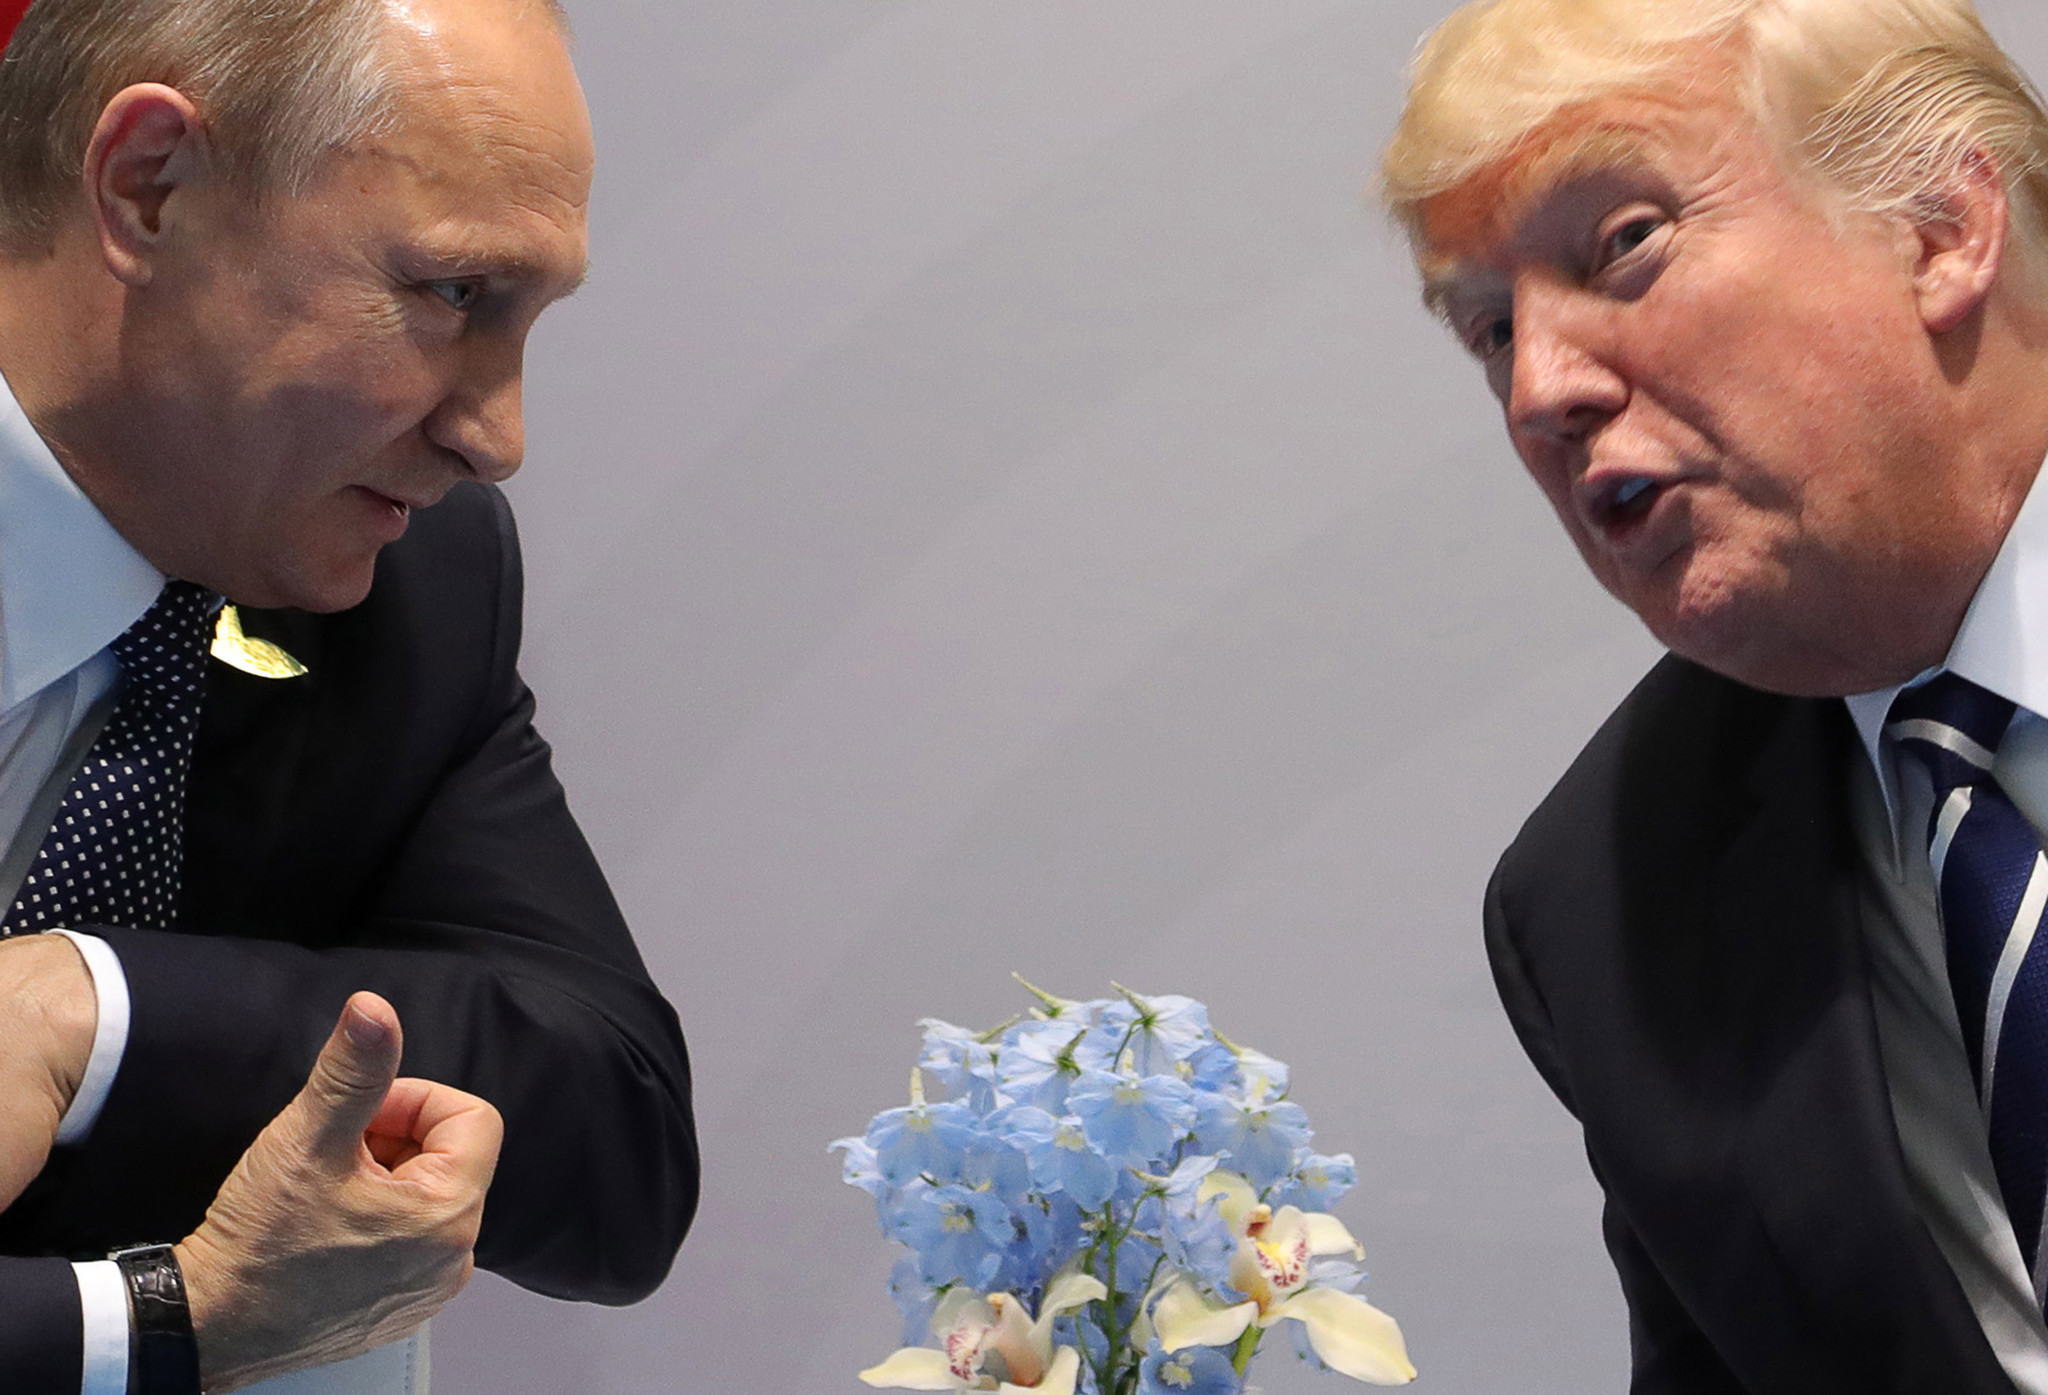 Russian President Vladimir Putin, left, and President Trump talk on the sidelines of the Group of 20 summit meeting in July in Hamburg, Germany.